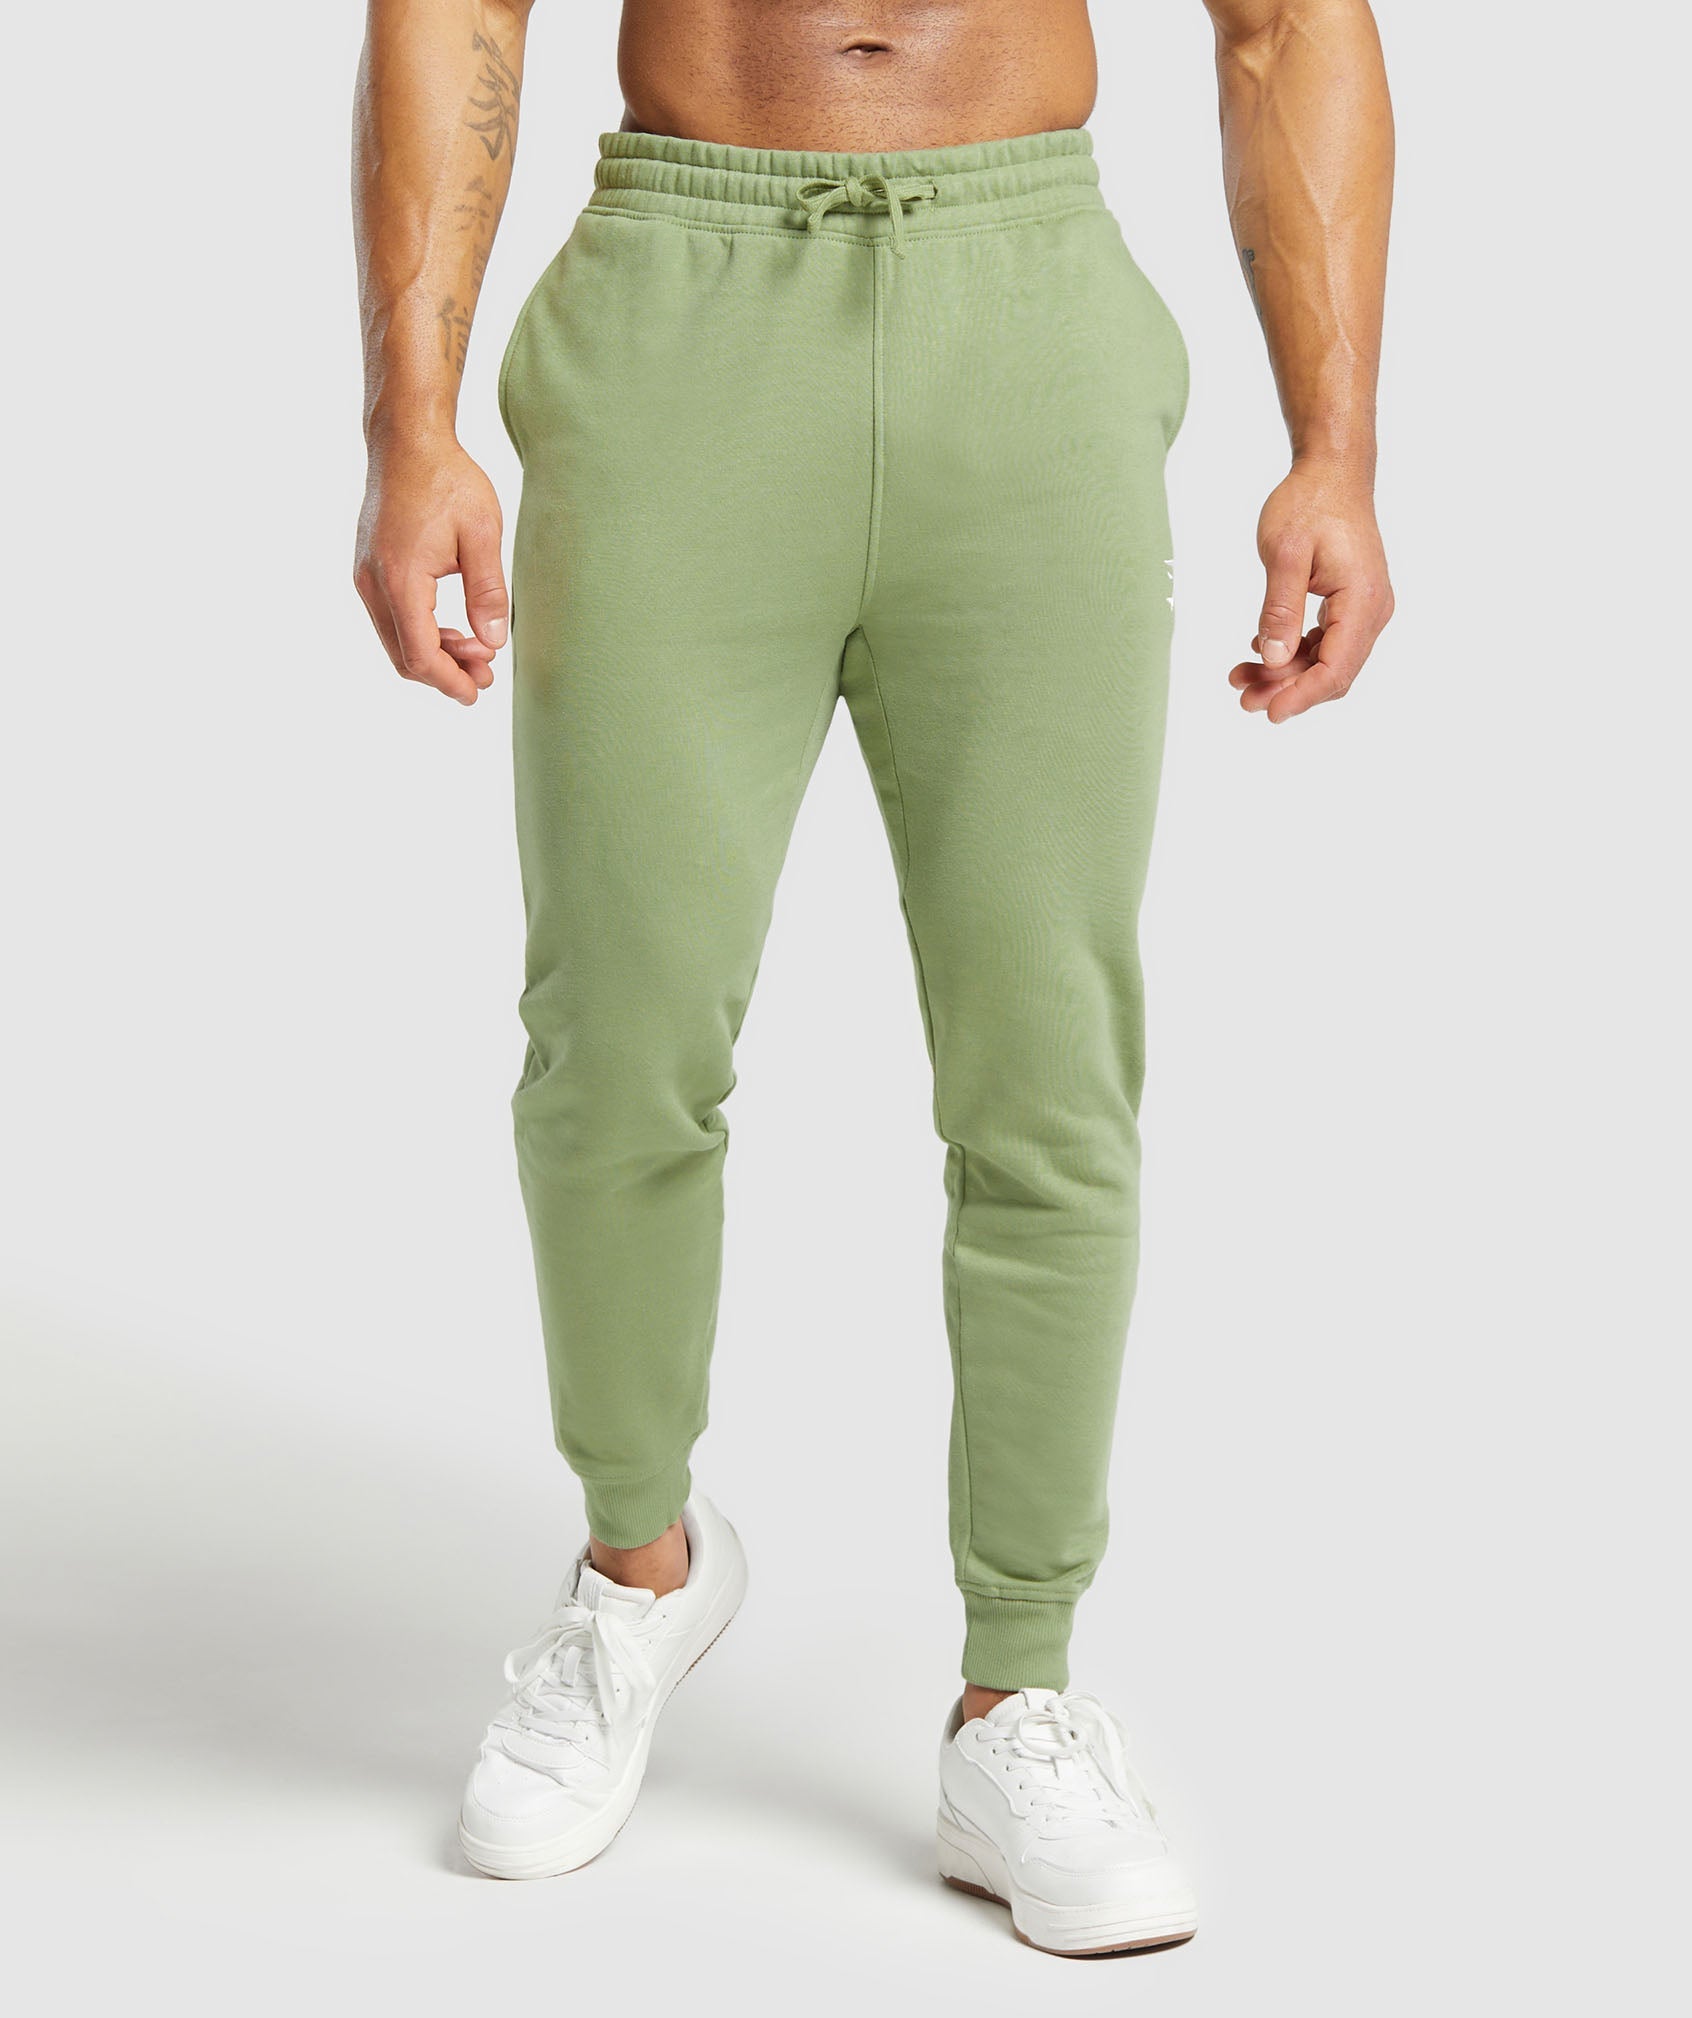 Crest Joggers in Natural Sage Green - view 1